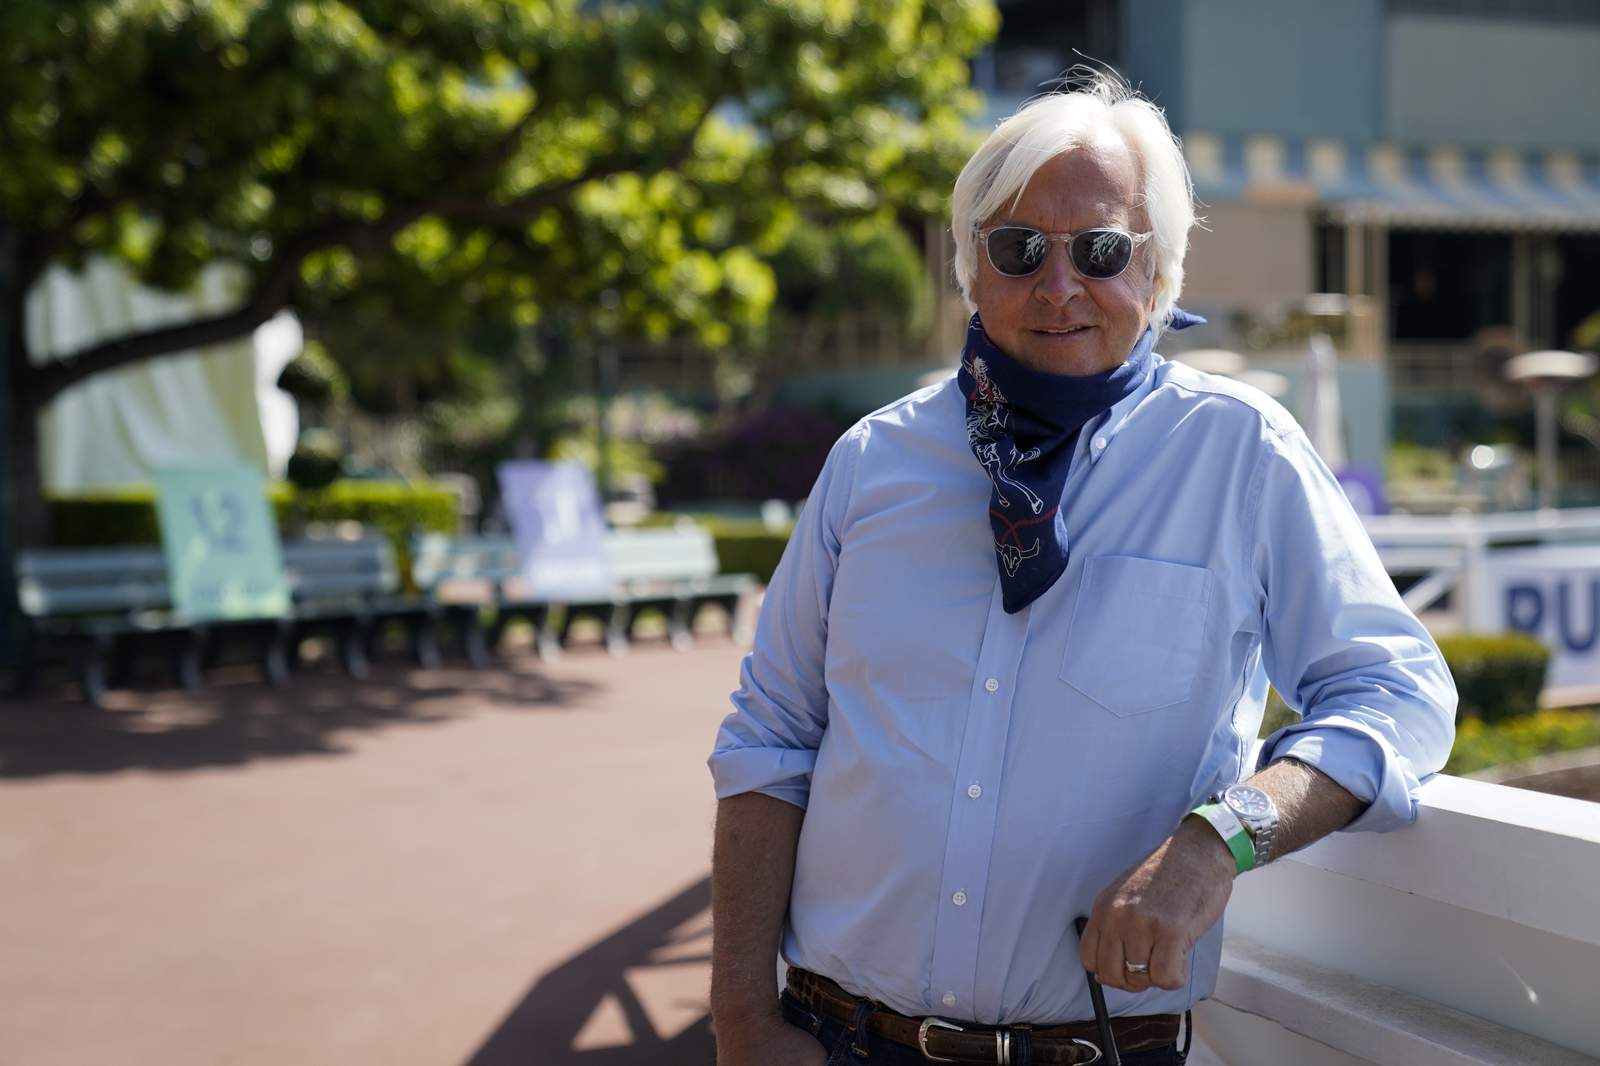 Reports: 2 horses trained by Bob Baffert fail drug tests